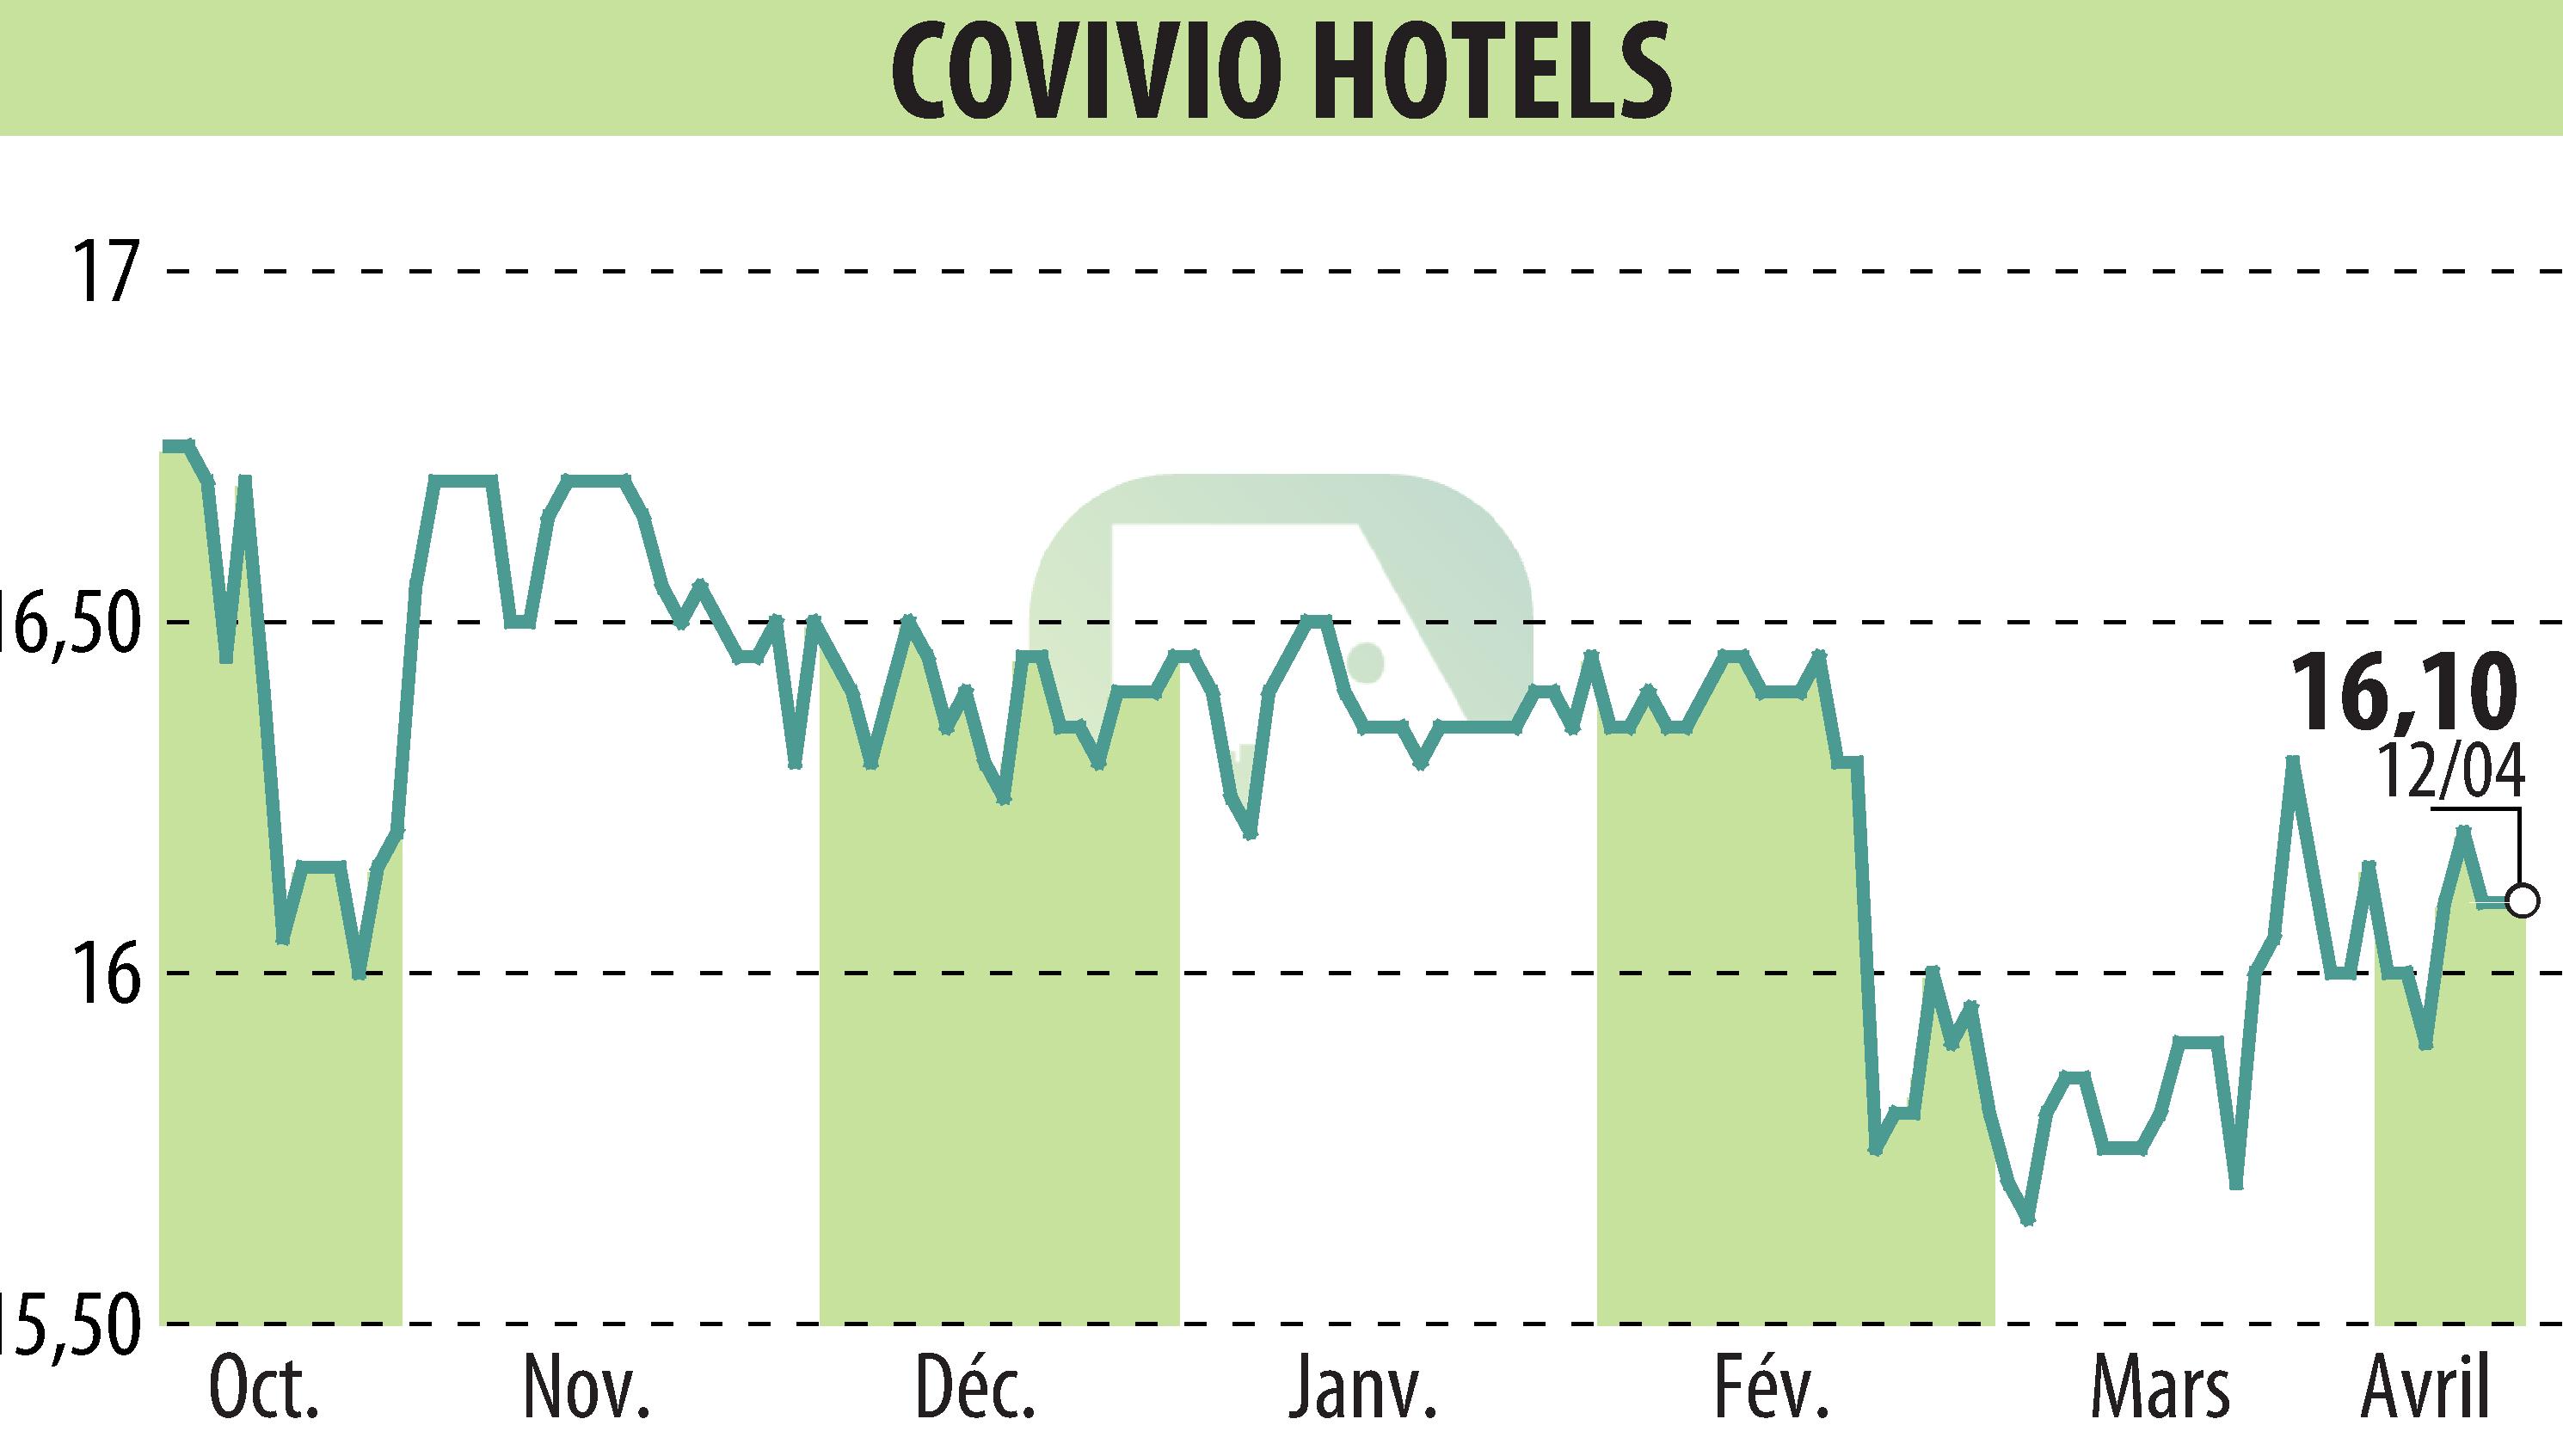 Stock price chart of Covivio Hotels (EPA:COVH) showing fluctuations.